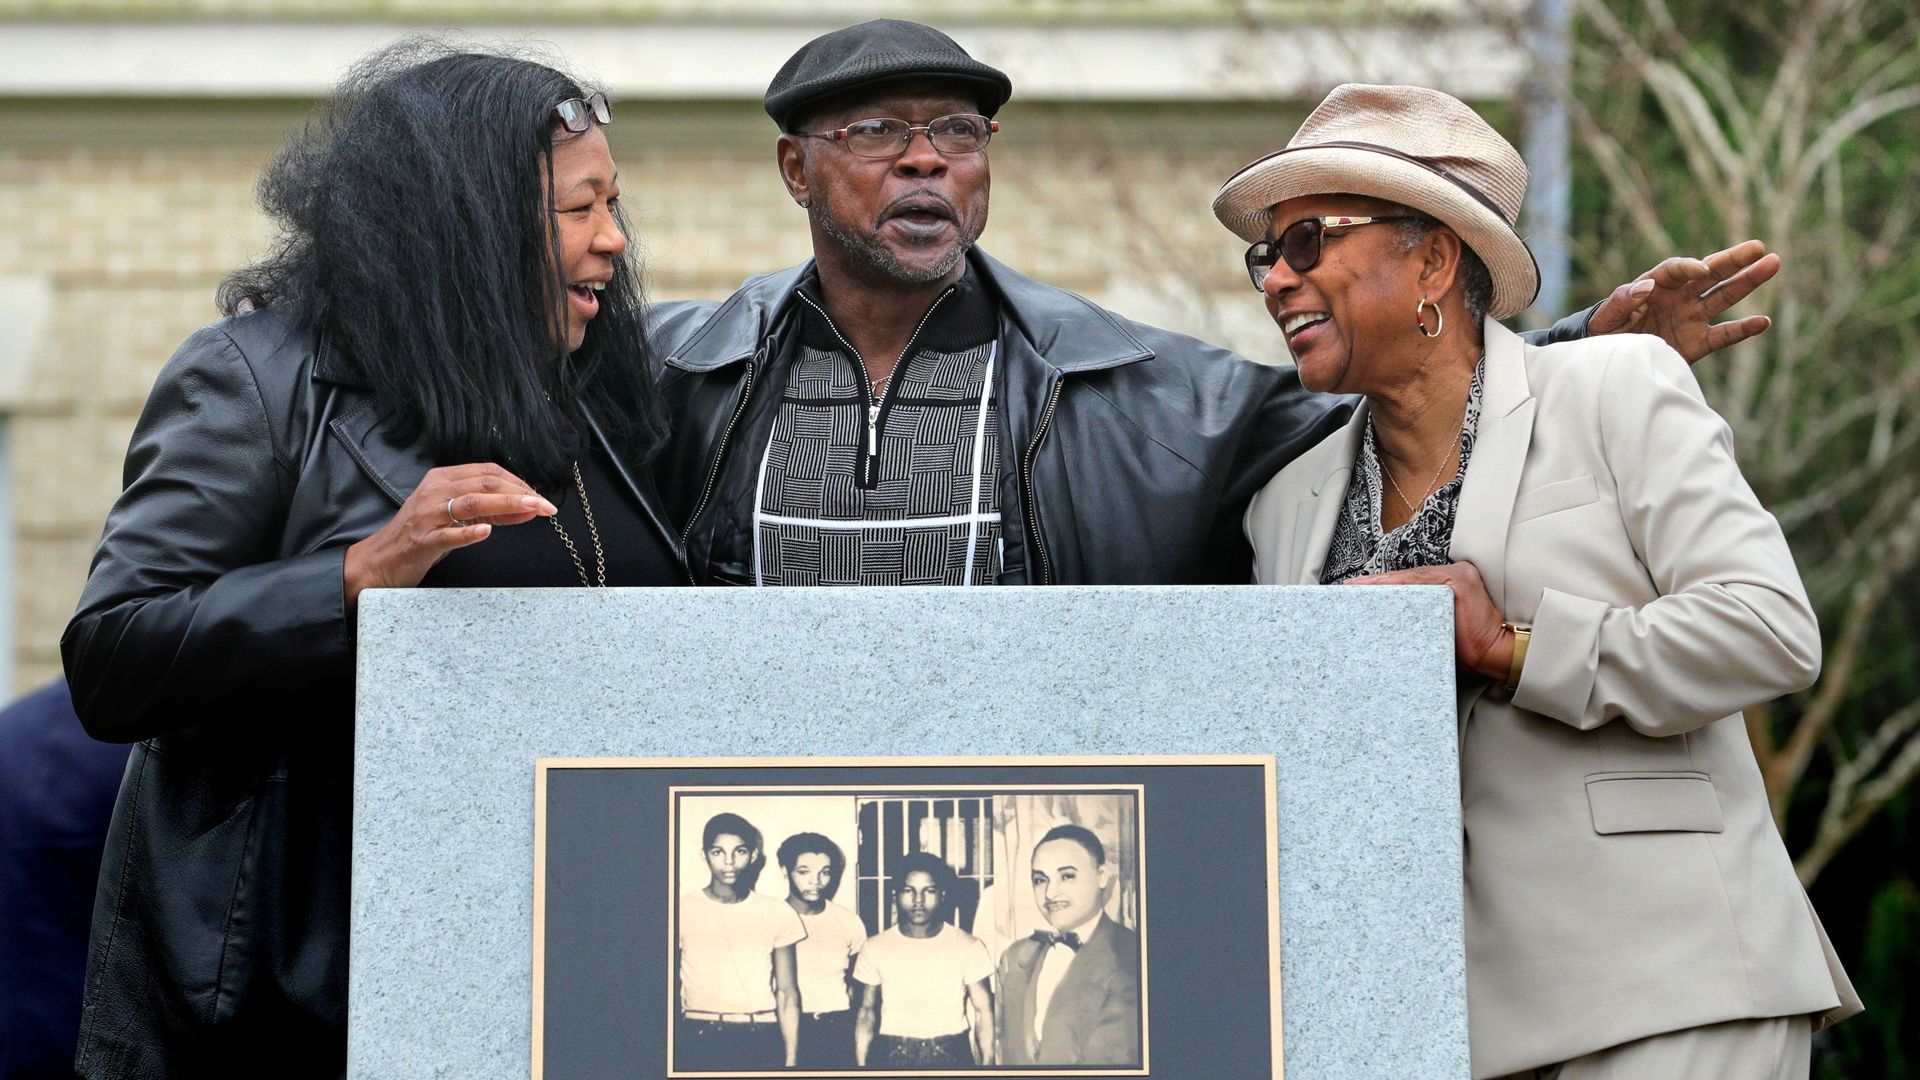 A man and two woman stand behind a granite monument with a plaque that reads "In Memory of the Groveland Four" under an image of four young men.  